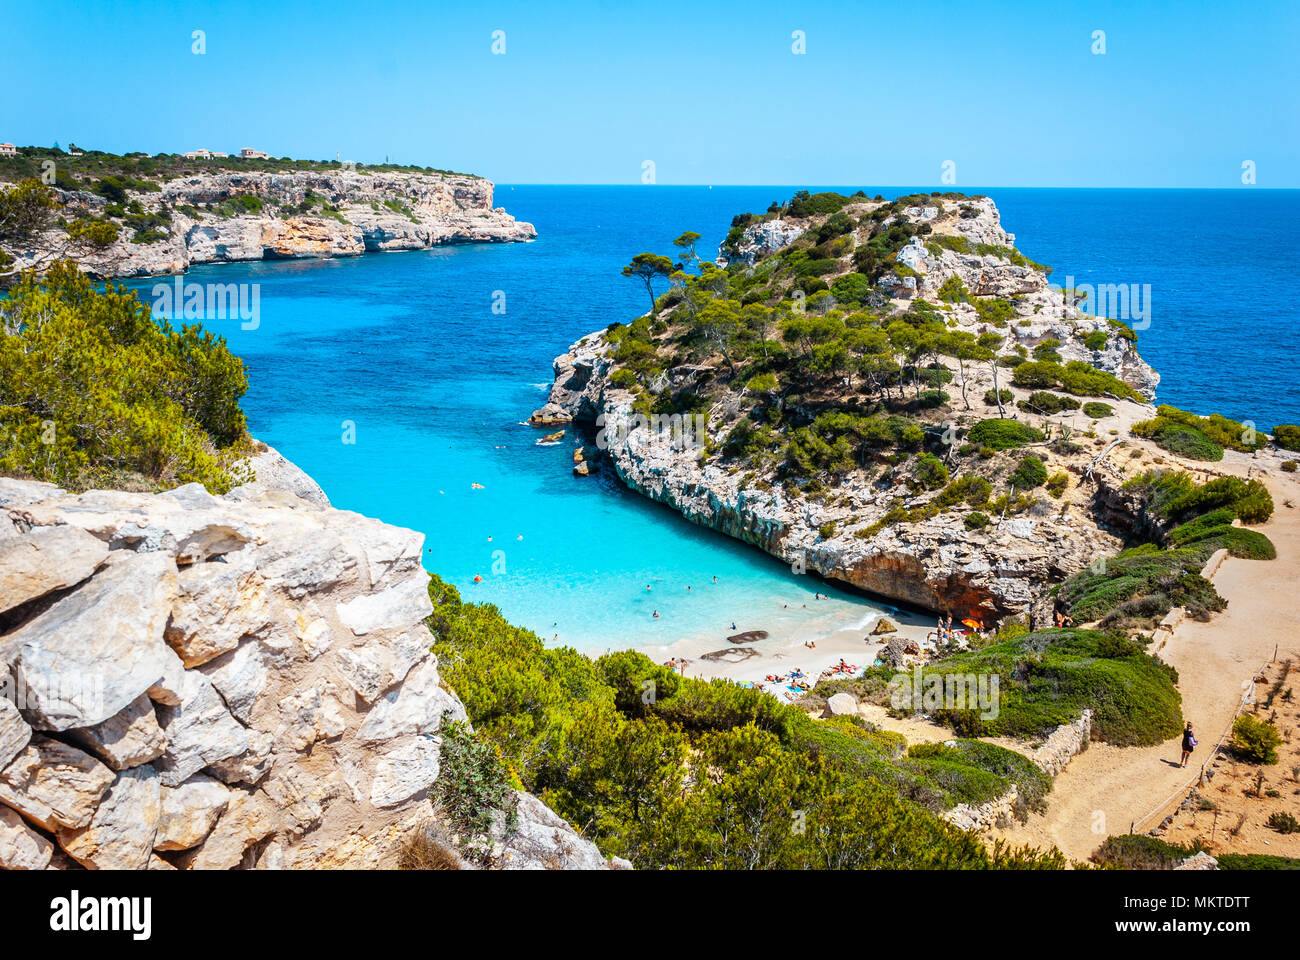 Calo des Moro, Mallorca on a sunny day with people on the beach Stock Photo